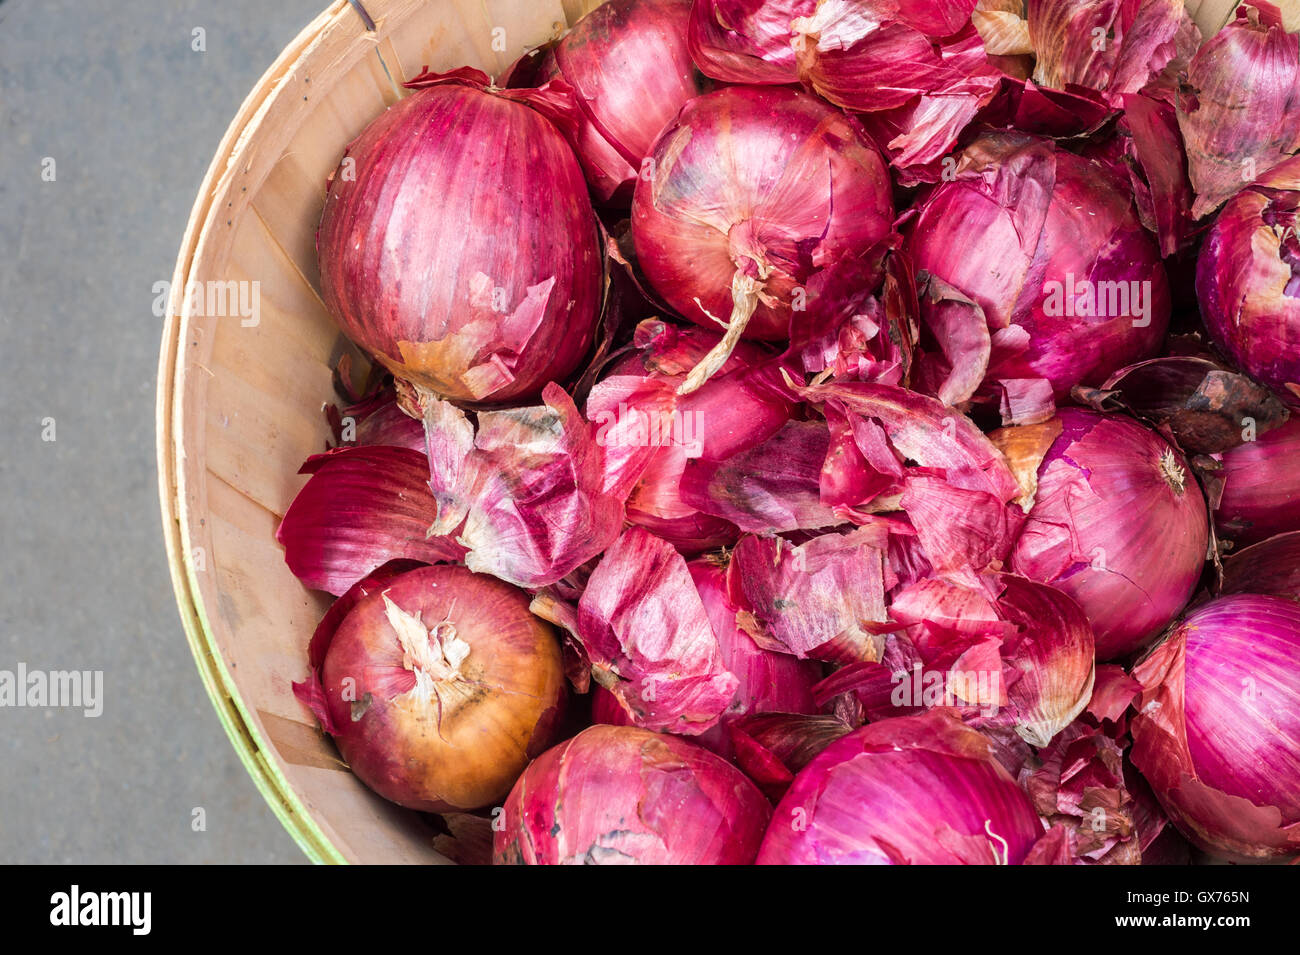 Red onions in a basket at the market Stock Photo